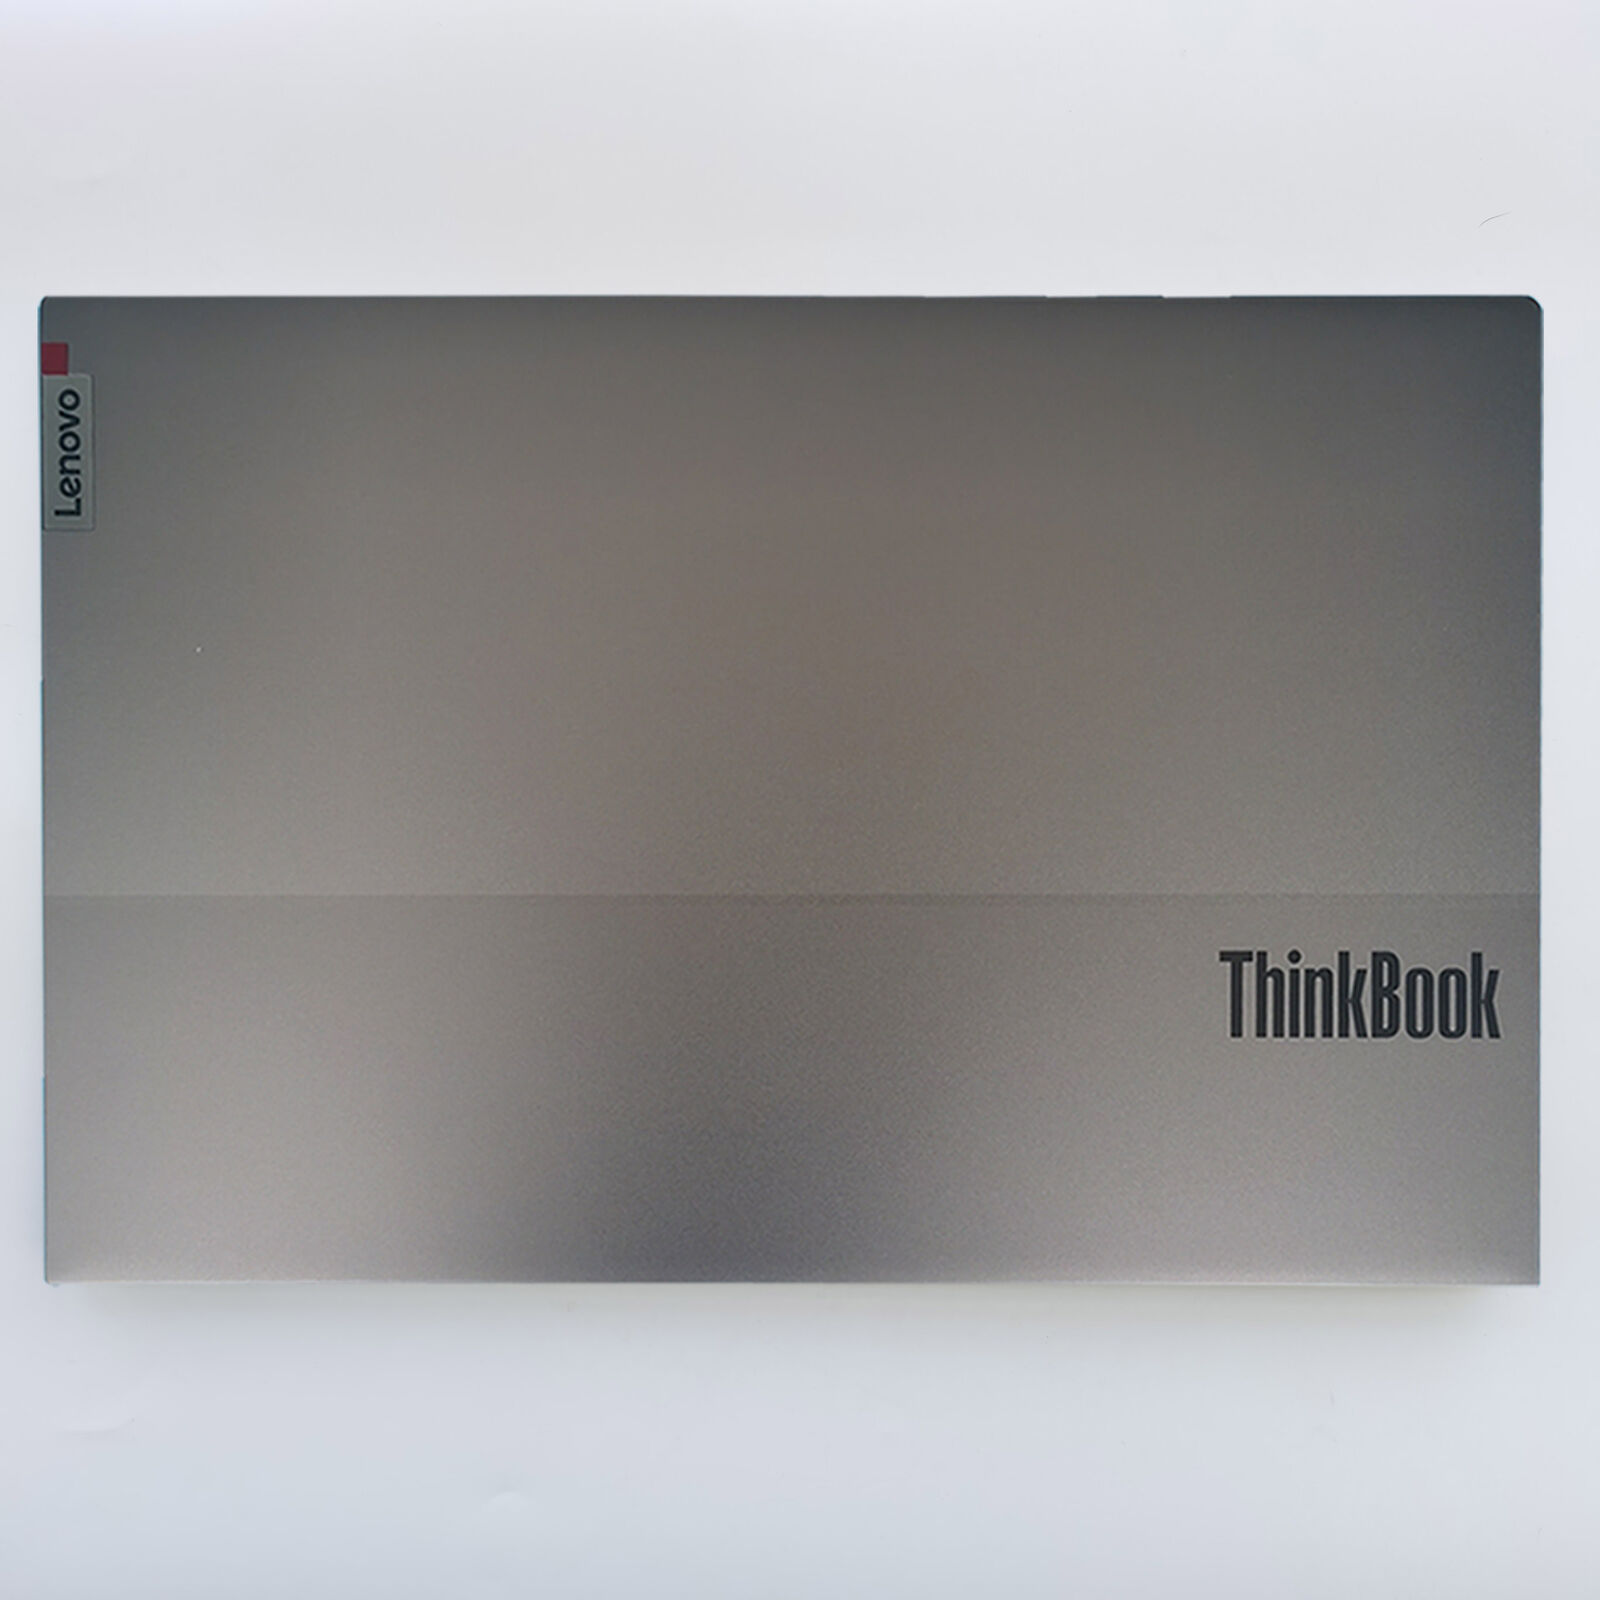 For Lenovo ThinkBook 15 G2 ITL /ARE G3 ACL/ITL LCD Back Cover/Bezel/Hinge Cover